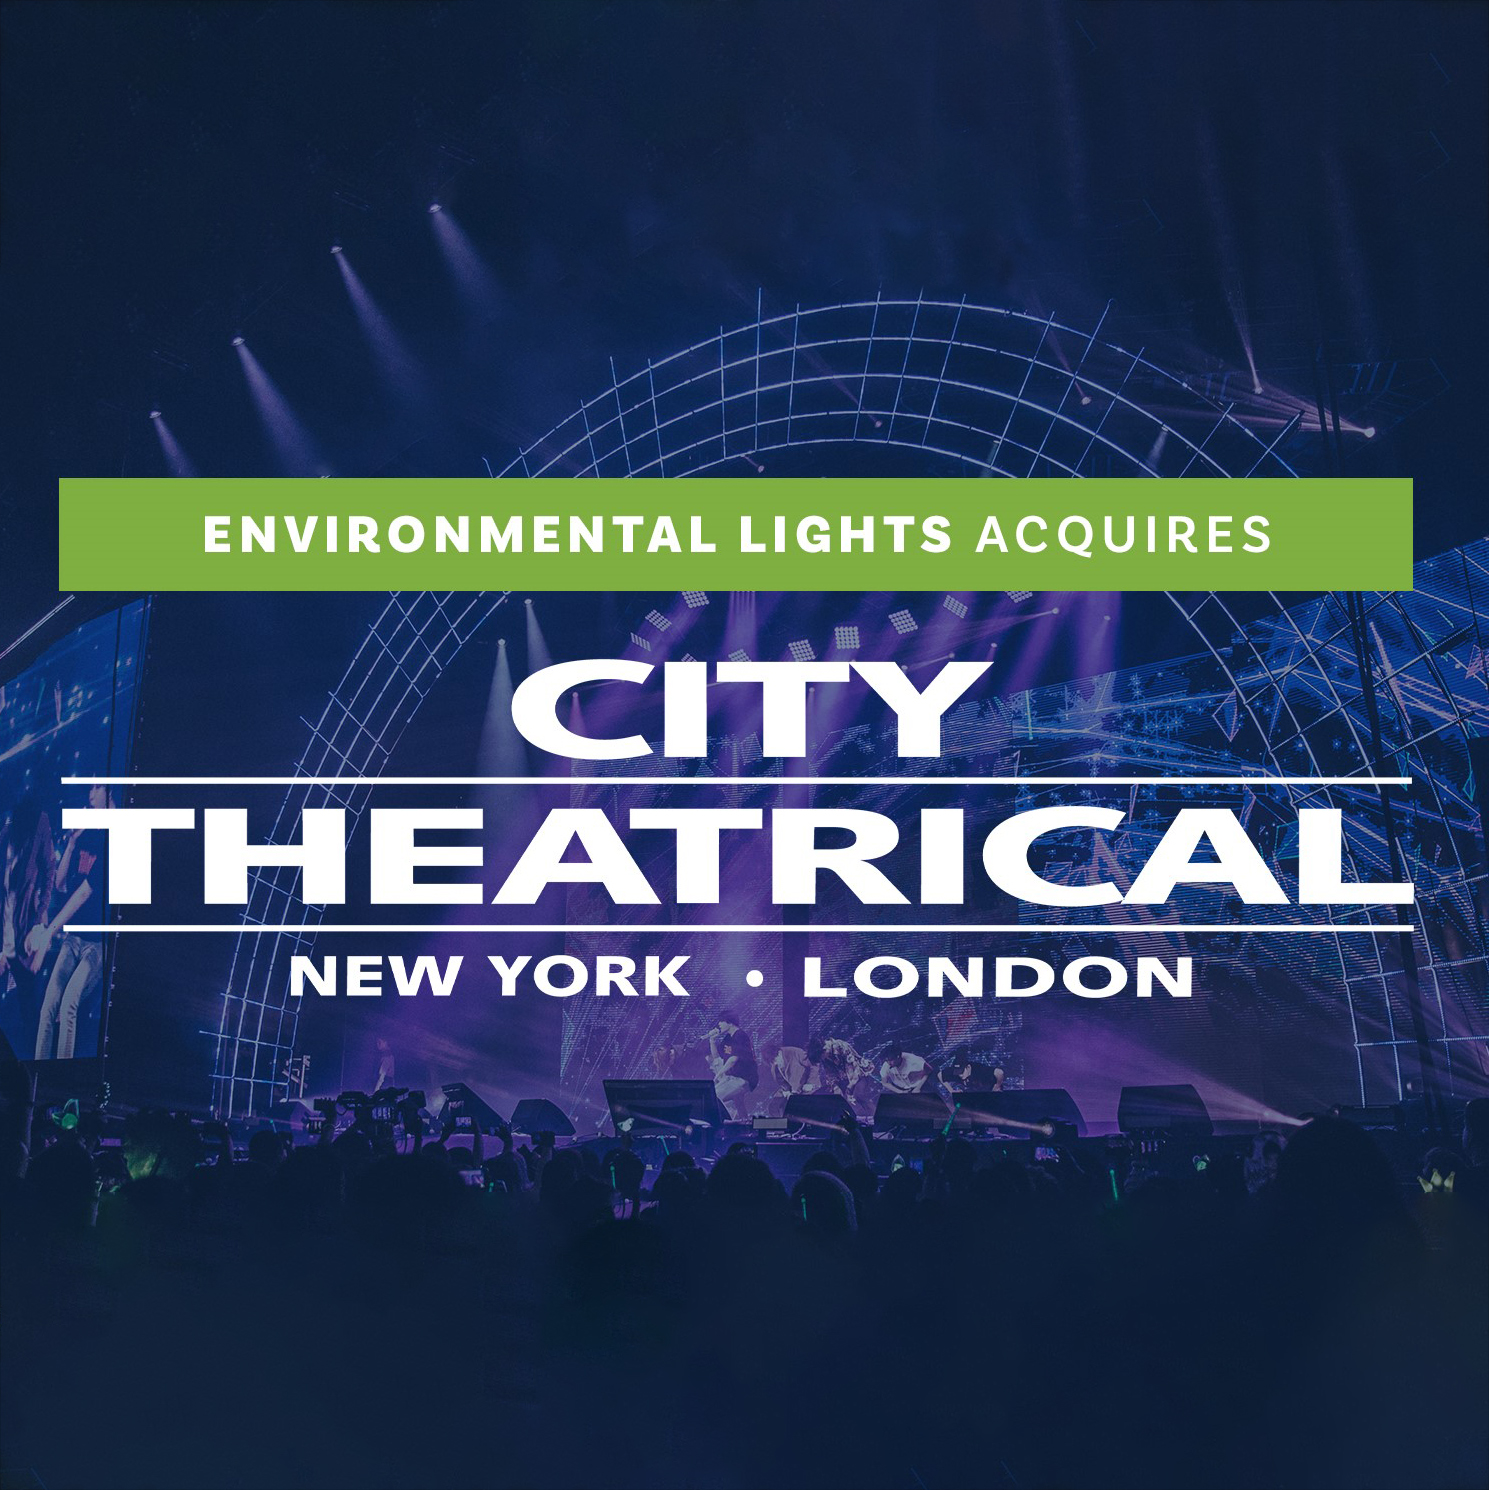 Environmental Lights acquires City Theatrical